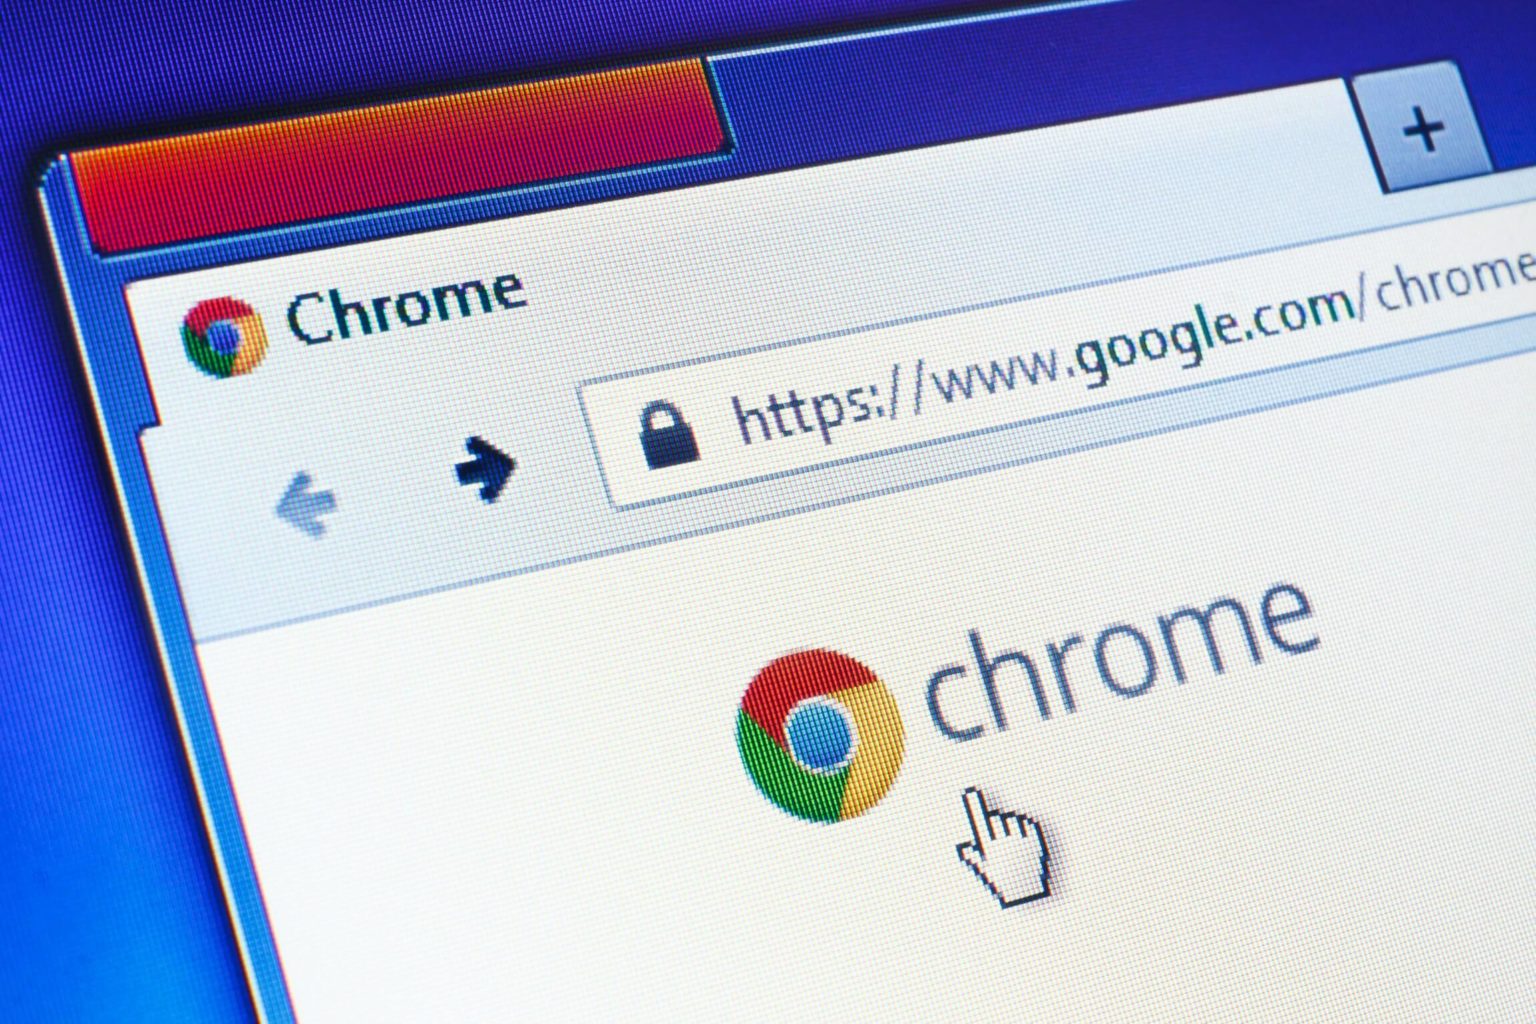 Google Chrome now targets ads based on your browser history, here